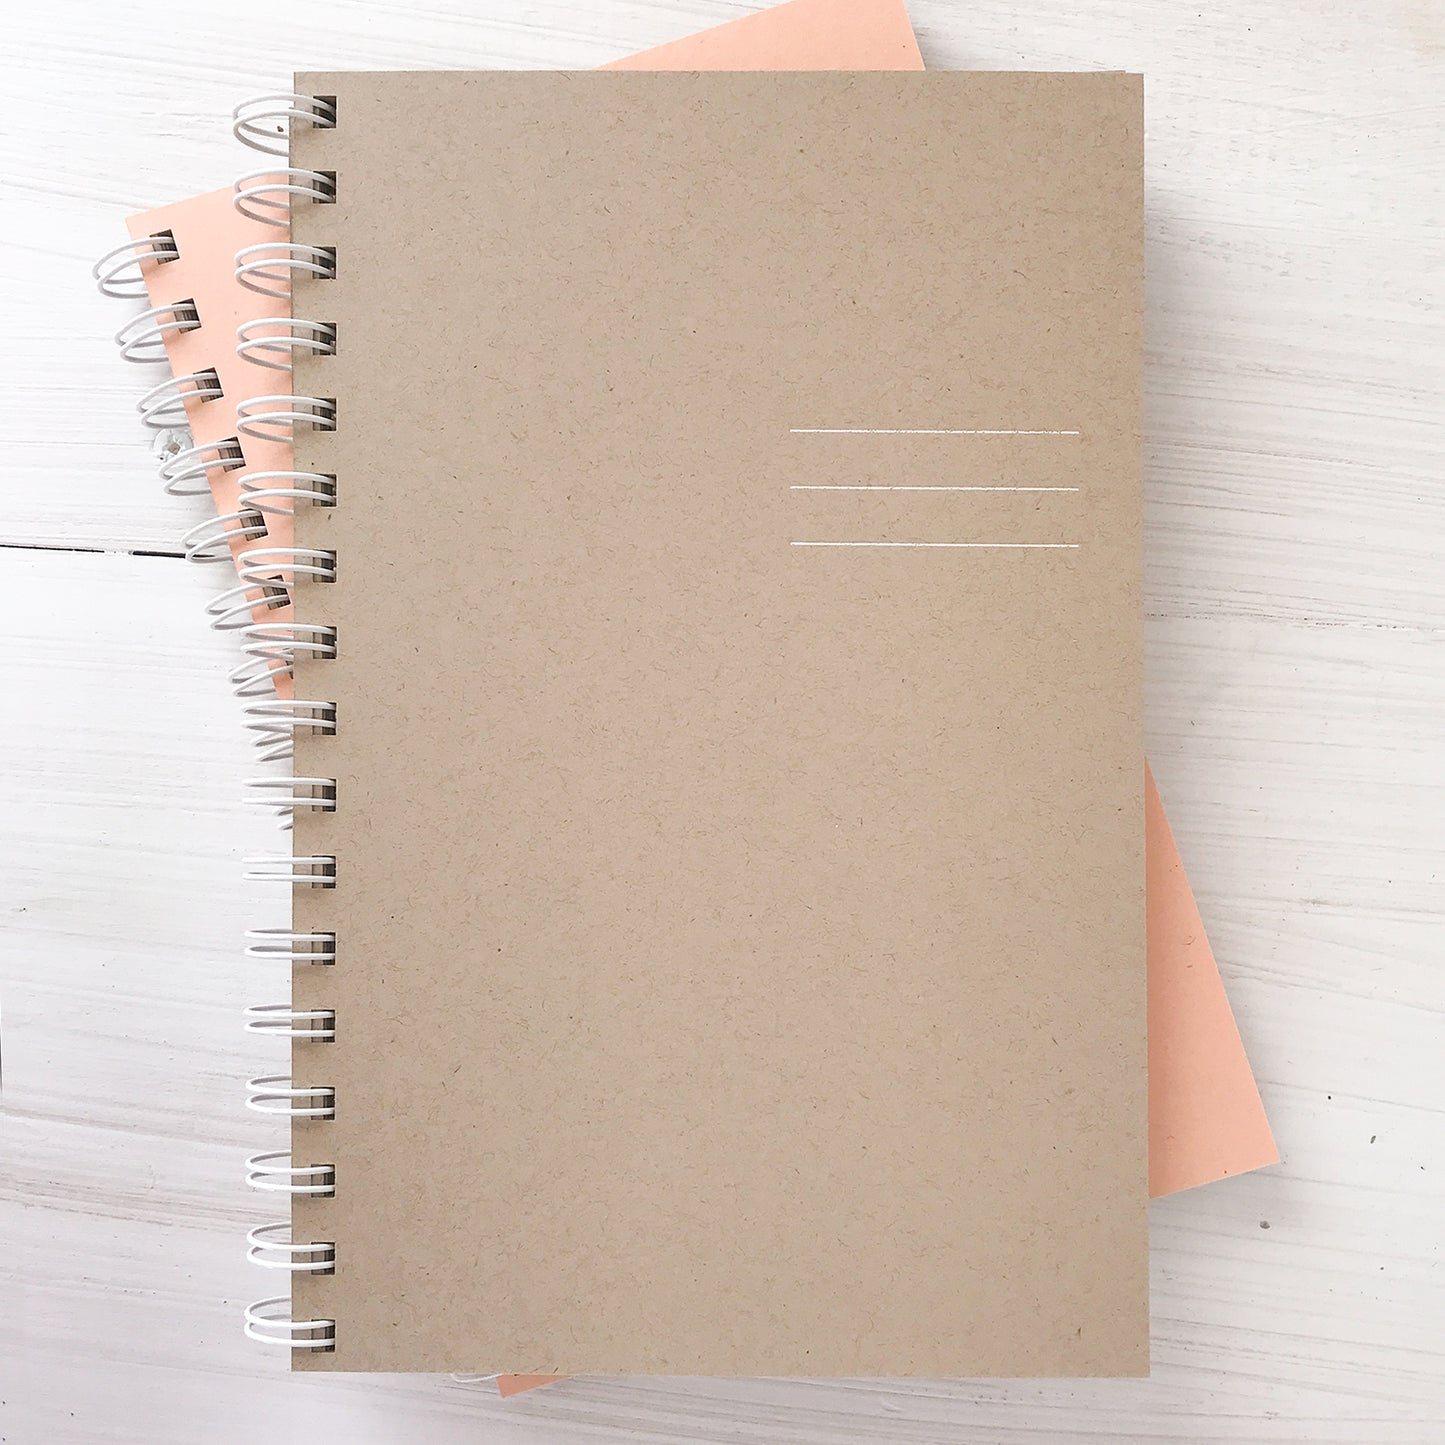 5 year small kraft monthly spiral planner - start any month